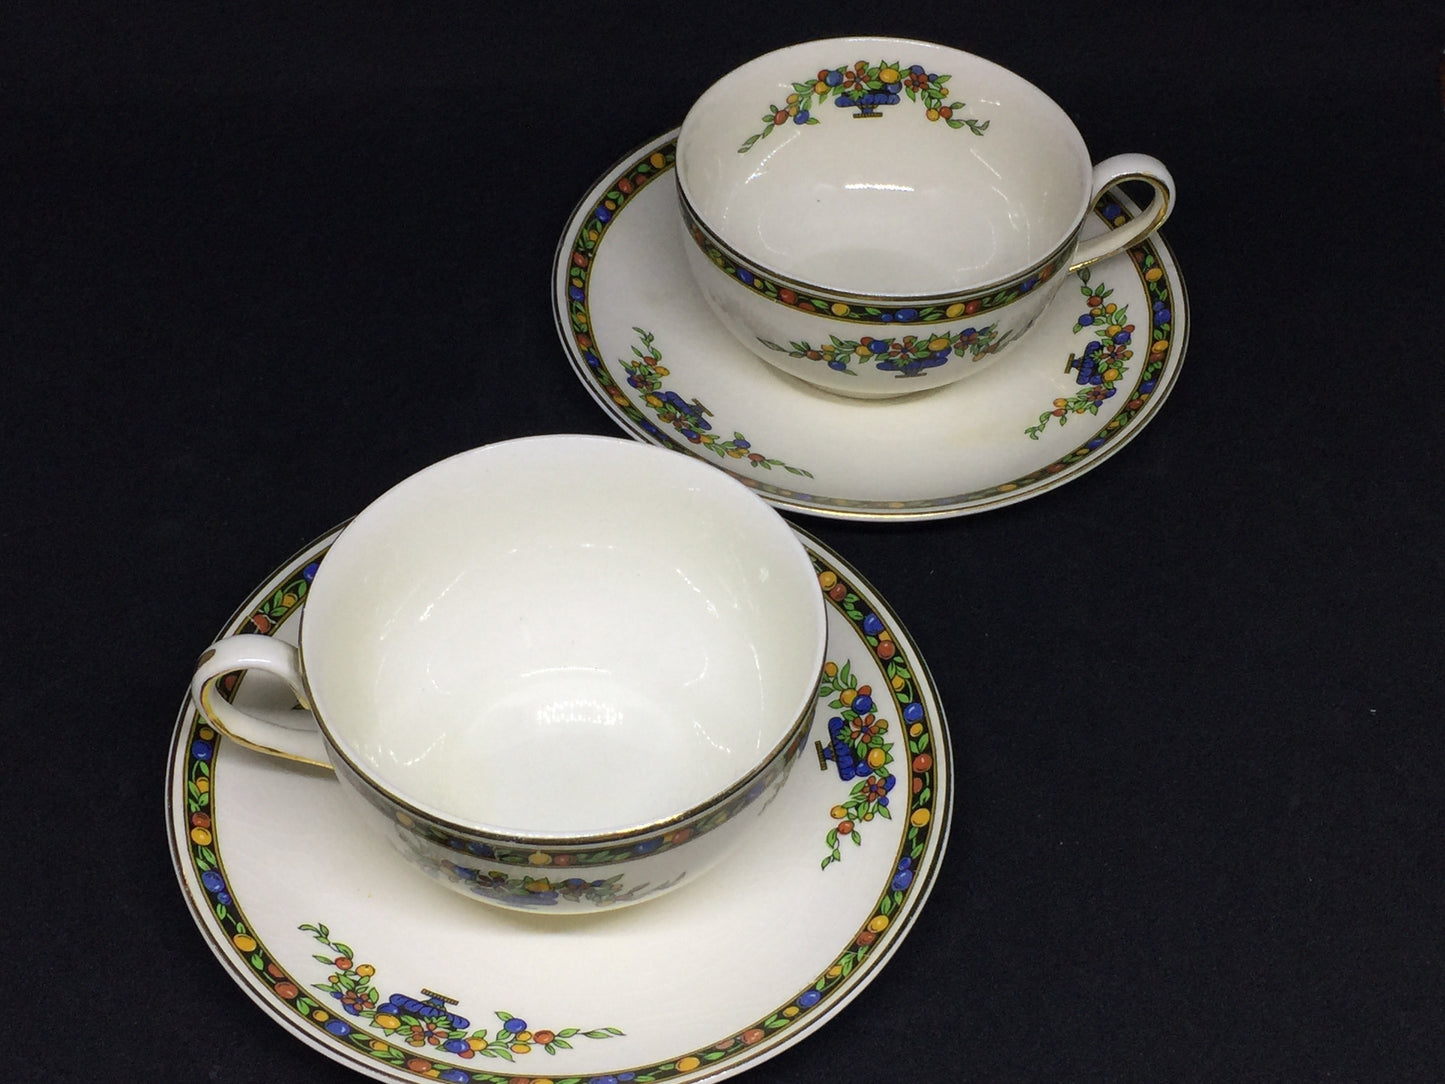 Antique 1030s Johnson Bros Pareek Cups and Saucers 2 Sets